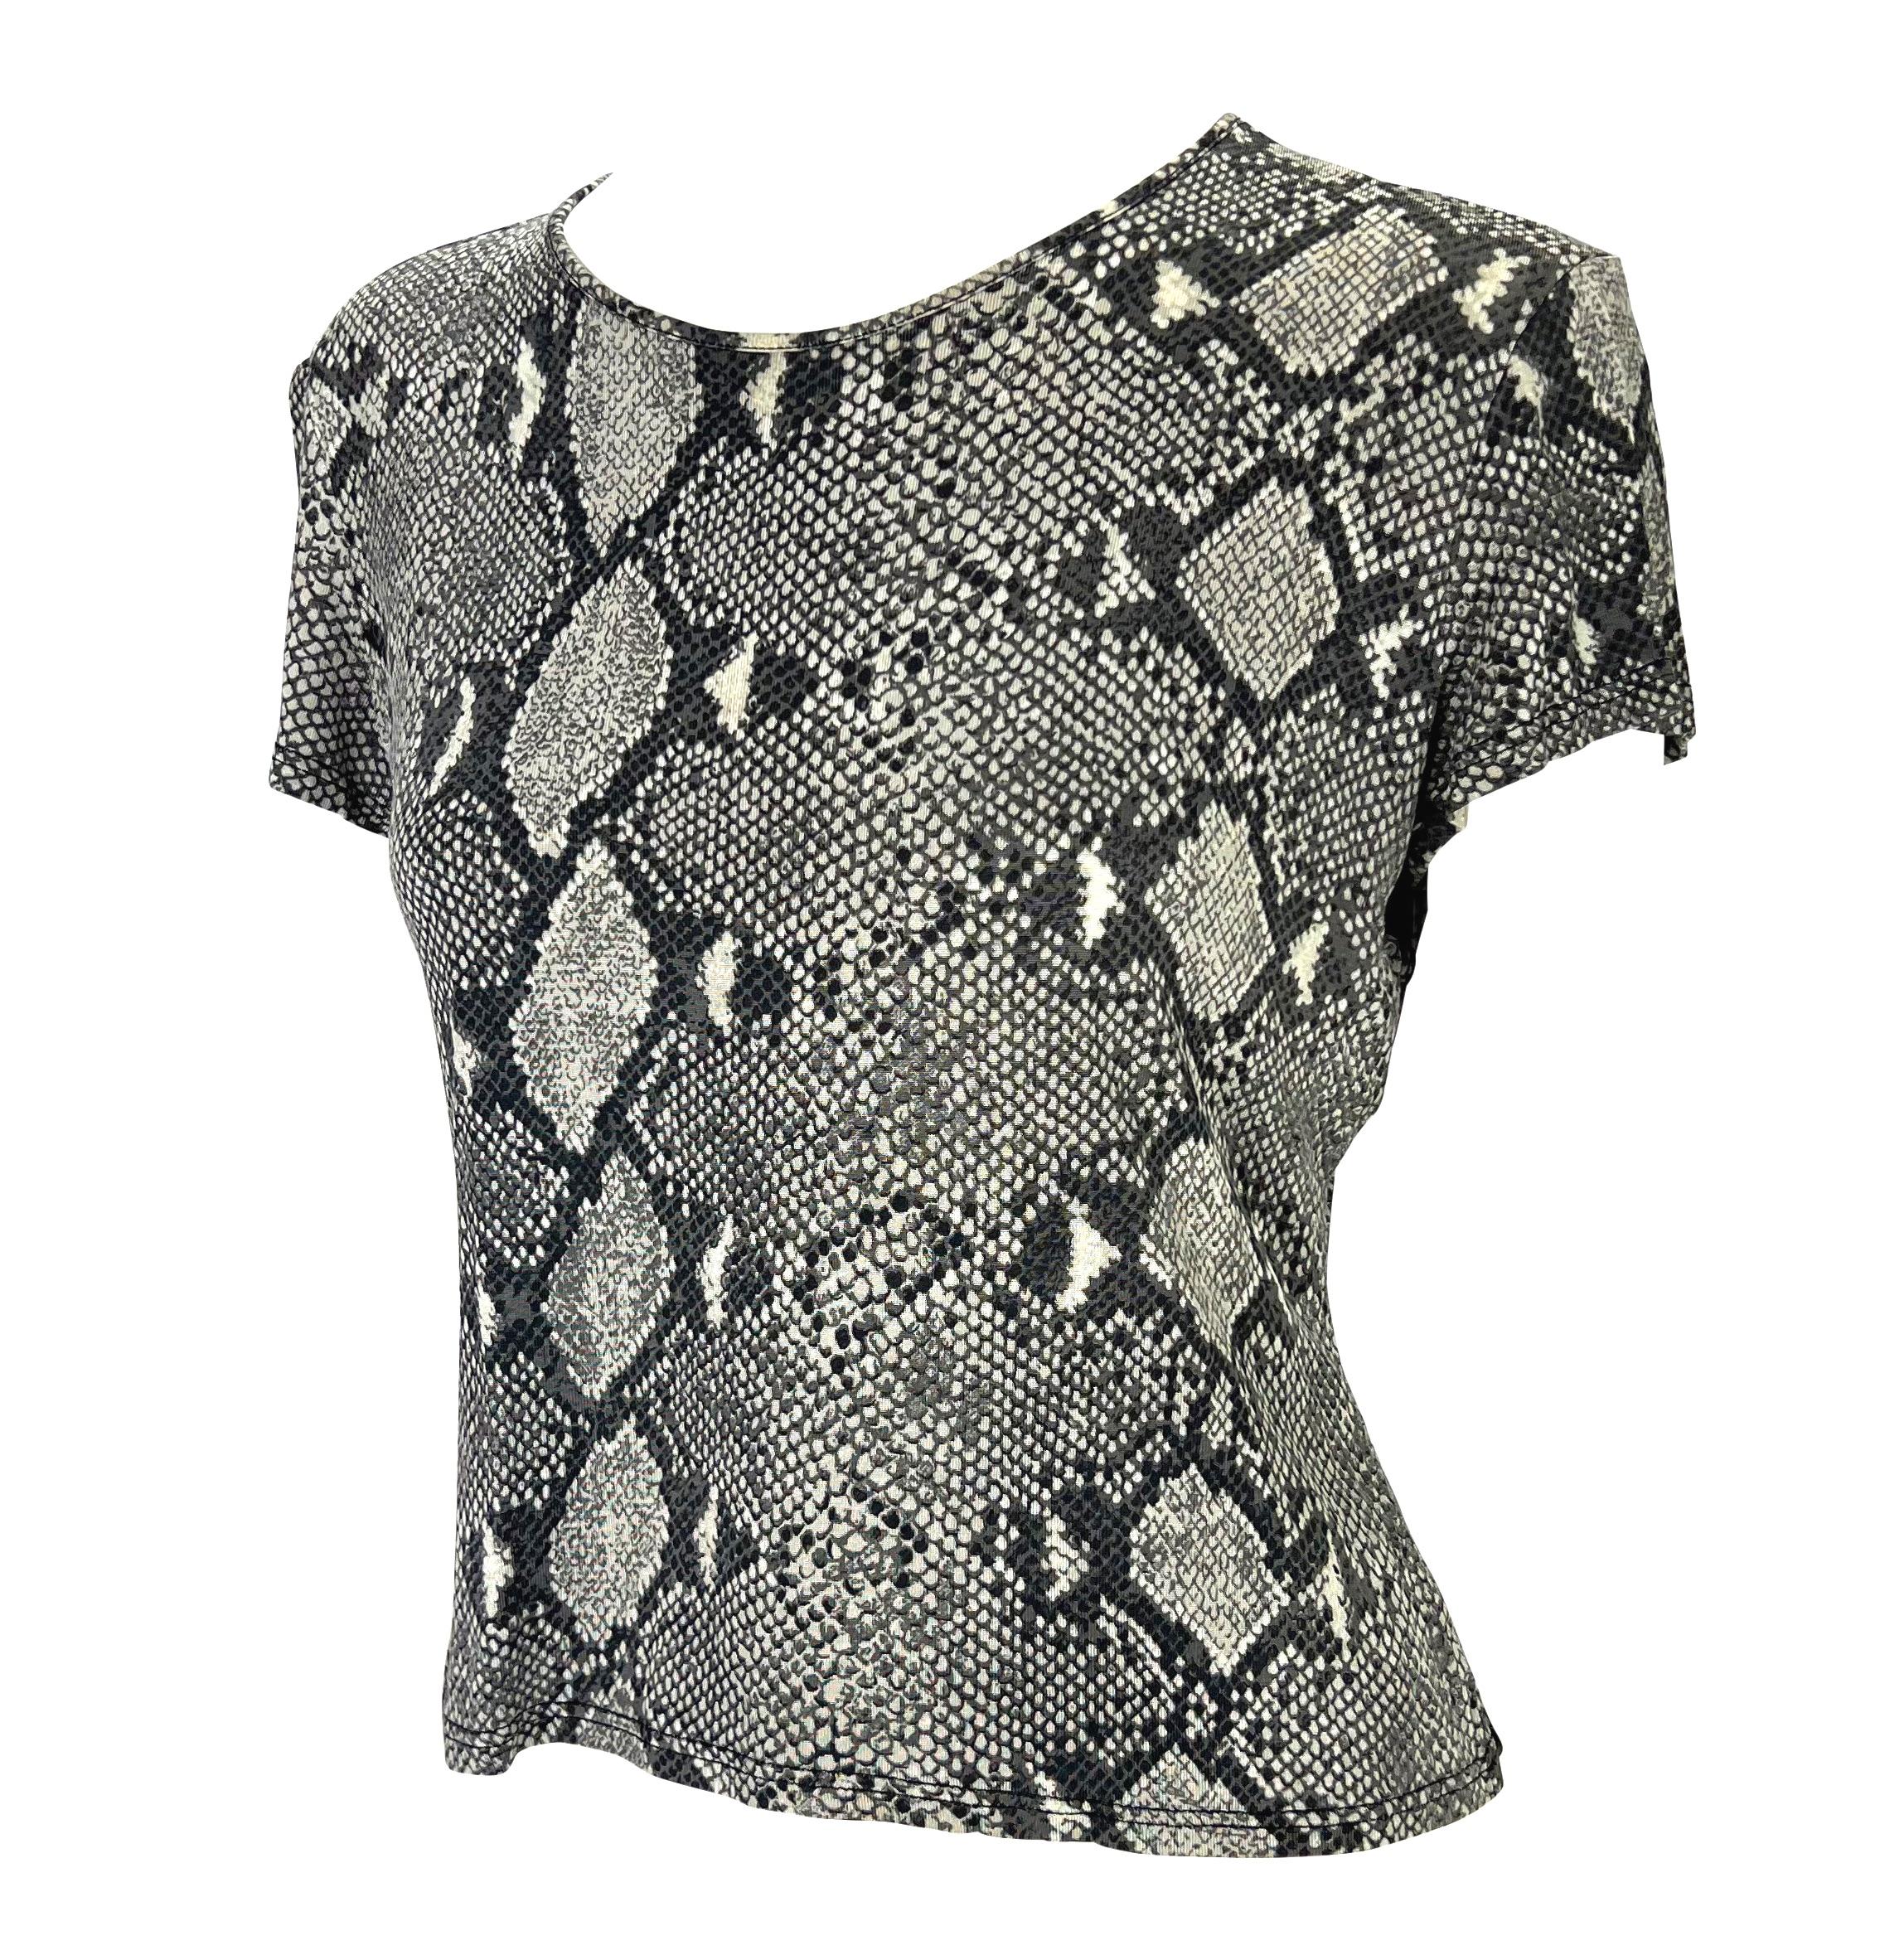 Presenting a grey snakeskin print Gucci t-shirt, designed by Tom Ford. From the Spring/Summer 2000 collection, the season's runway was covered in the identical snakeskin print as this t-shirt. This entirely viscose shirt features a wide crew